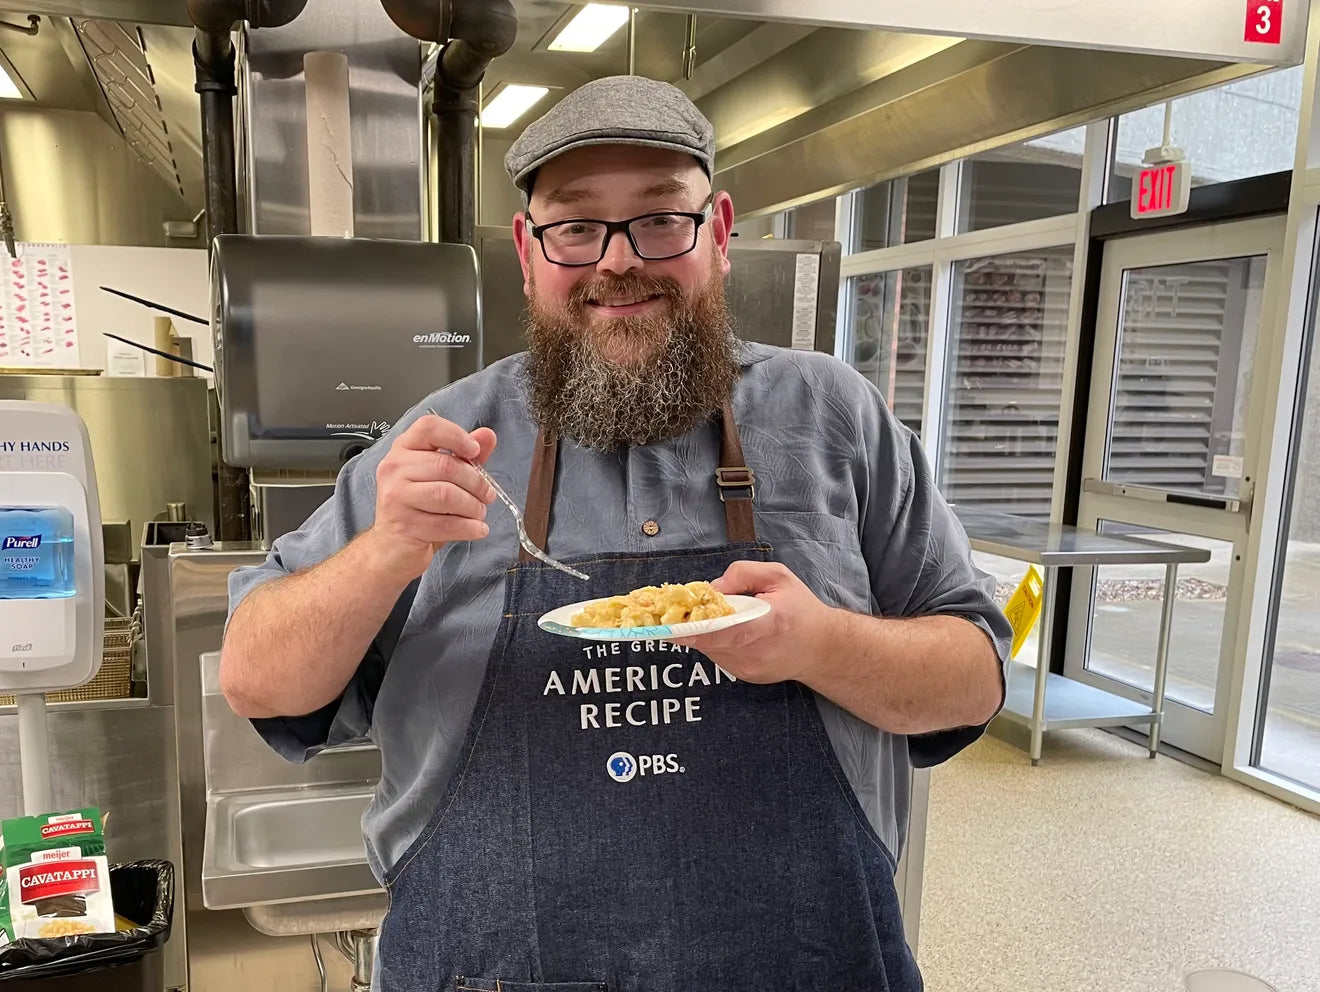 Brian Leigh in Great American Recipe apron eating Surprise Wedding Mac & Cheese